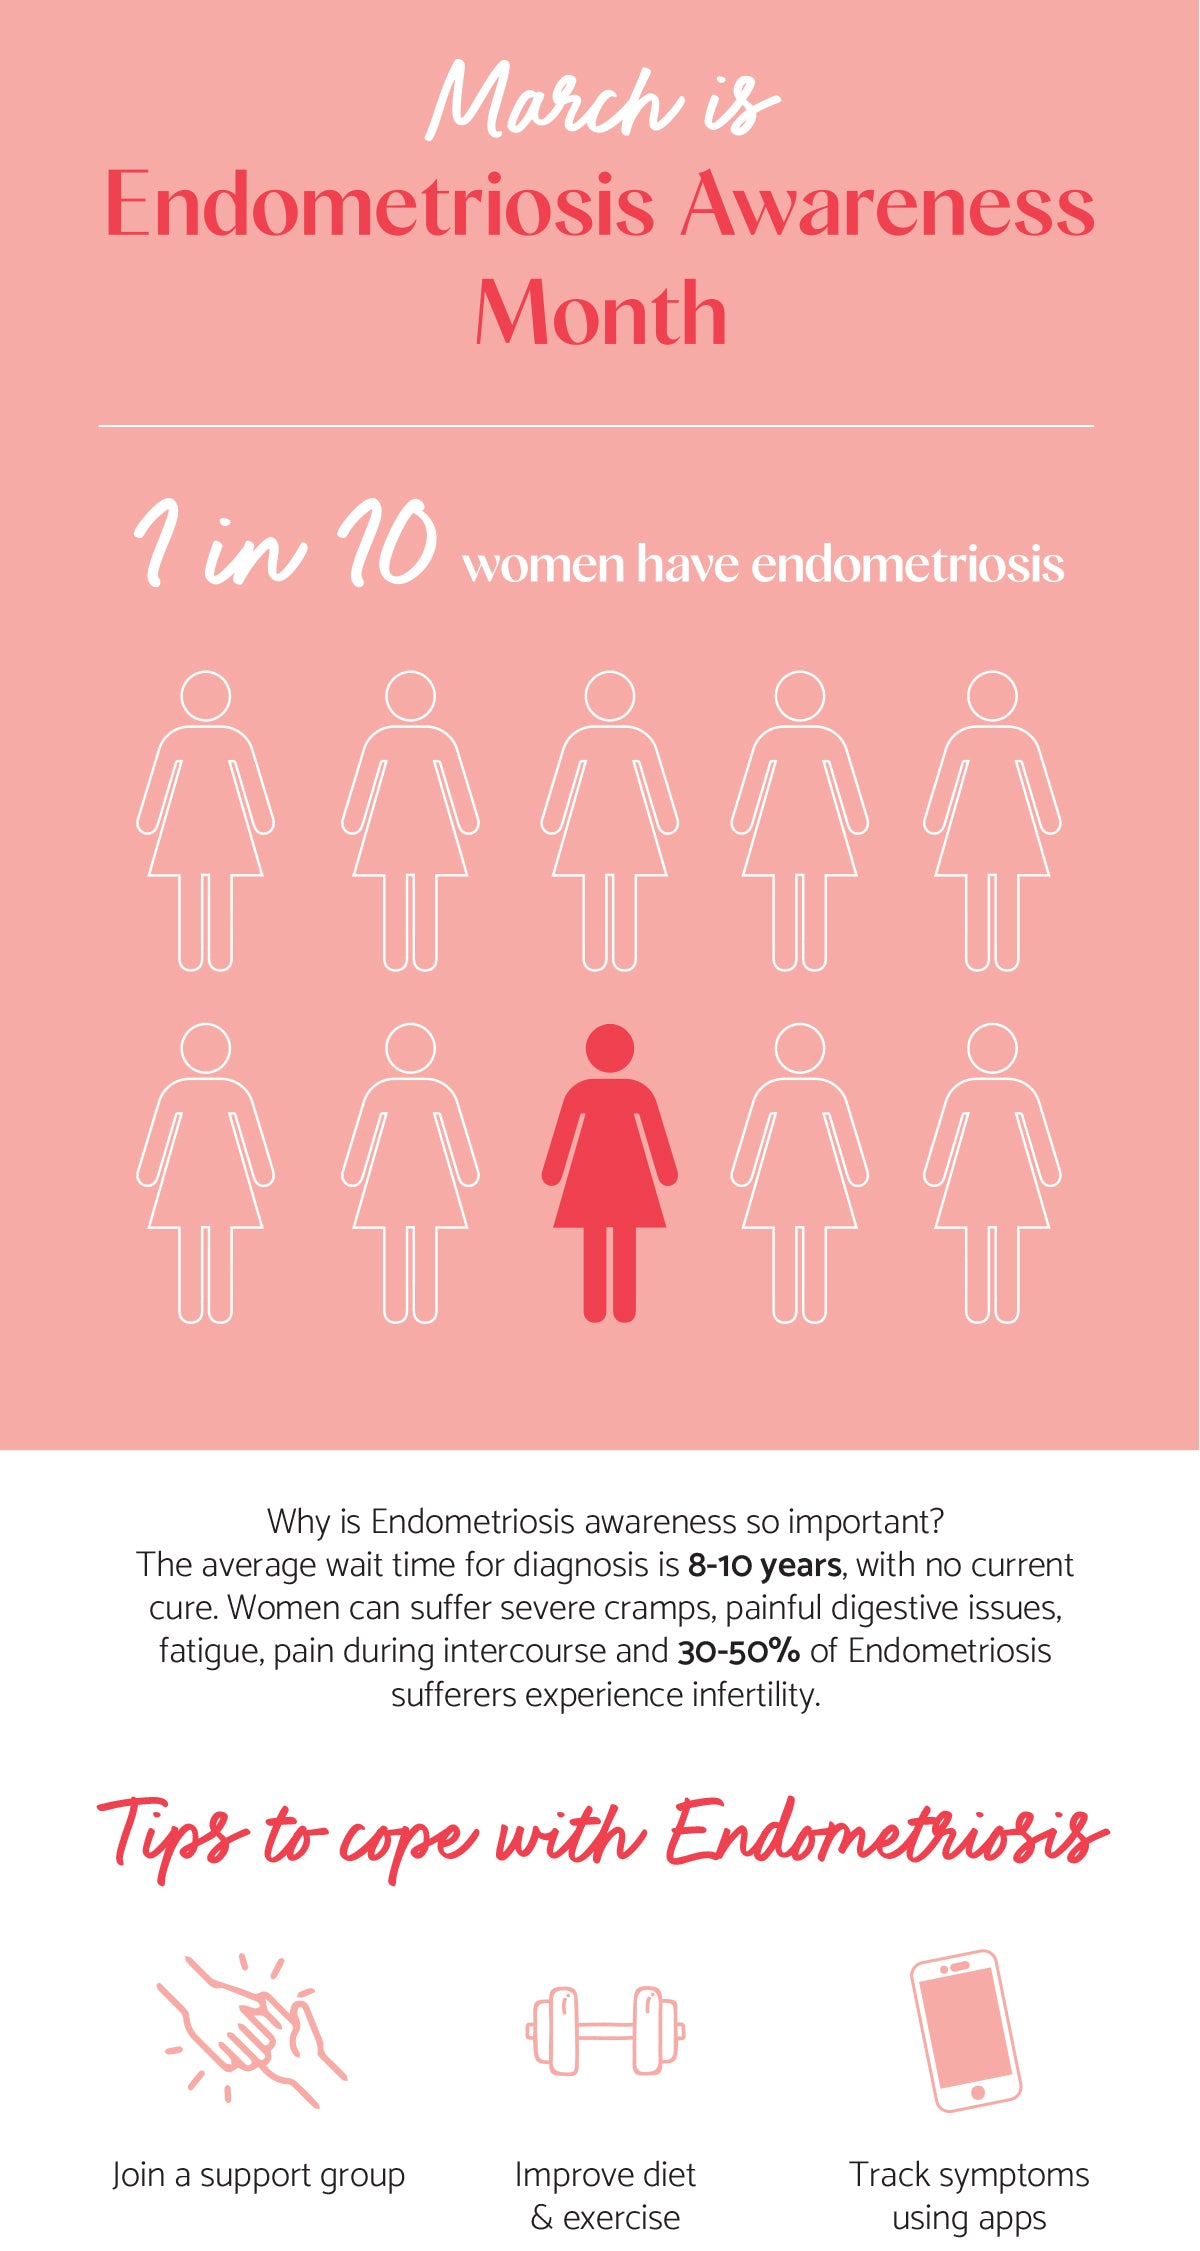 March is Endometriosis Awareness Month | 1 in 10 women have endometriosis. WHy is endo awareness month so important? The average wait time for diagnosis is 8-10 years, with no current cure. Women can suffer sever cramps, painful digestive issues, fatigue, pain during intercourse and 30-50% of endo sufferers experience infertility. Tips to cope with endo: join a support group, improve diet and exercise, track symproms using apps. 